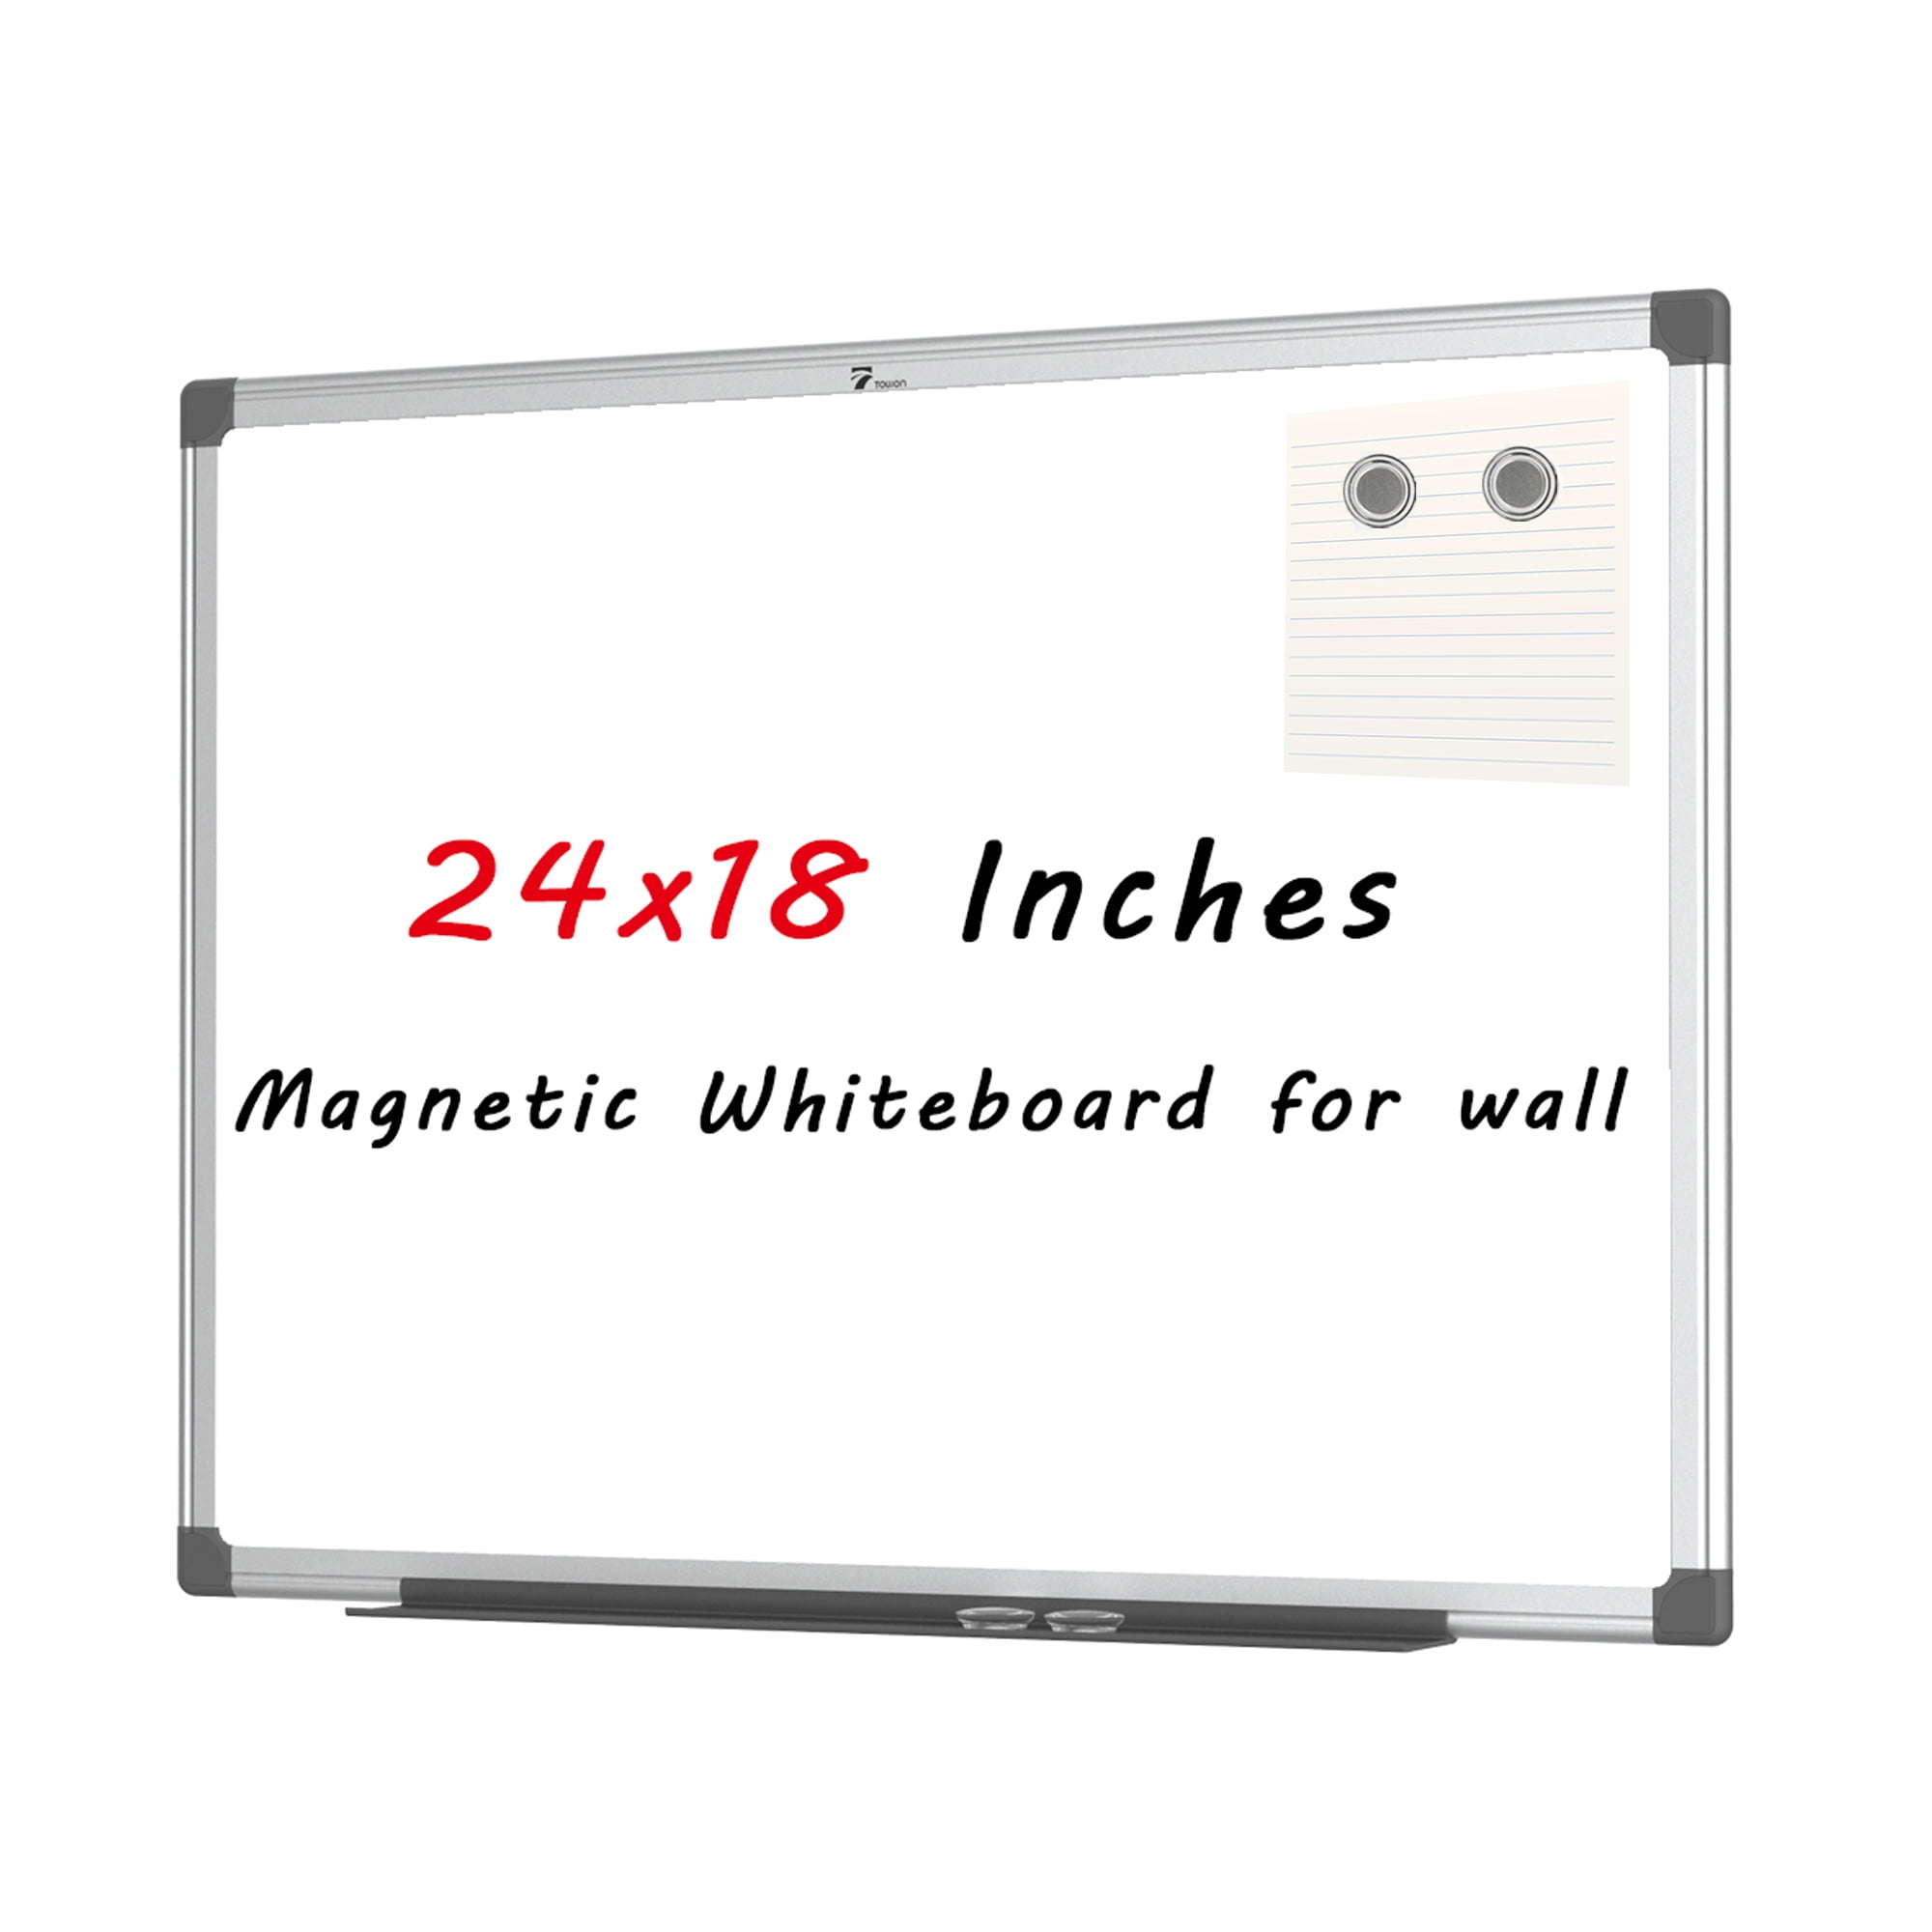 omgivet klipning Rend TOWON Magnetic Dry Erase White Board Aluminum Frame Lightweight Whiteboard  for Kids, Adults - 24"x18" Small Wall Hanging Home Office Writing Board  Pizarra w/ Tray, 2 Magnets - Walmart.com